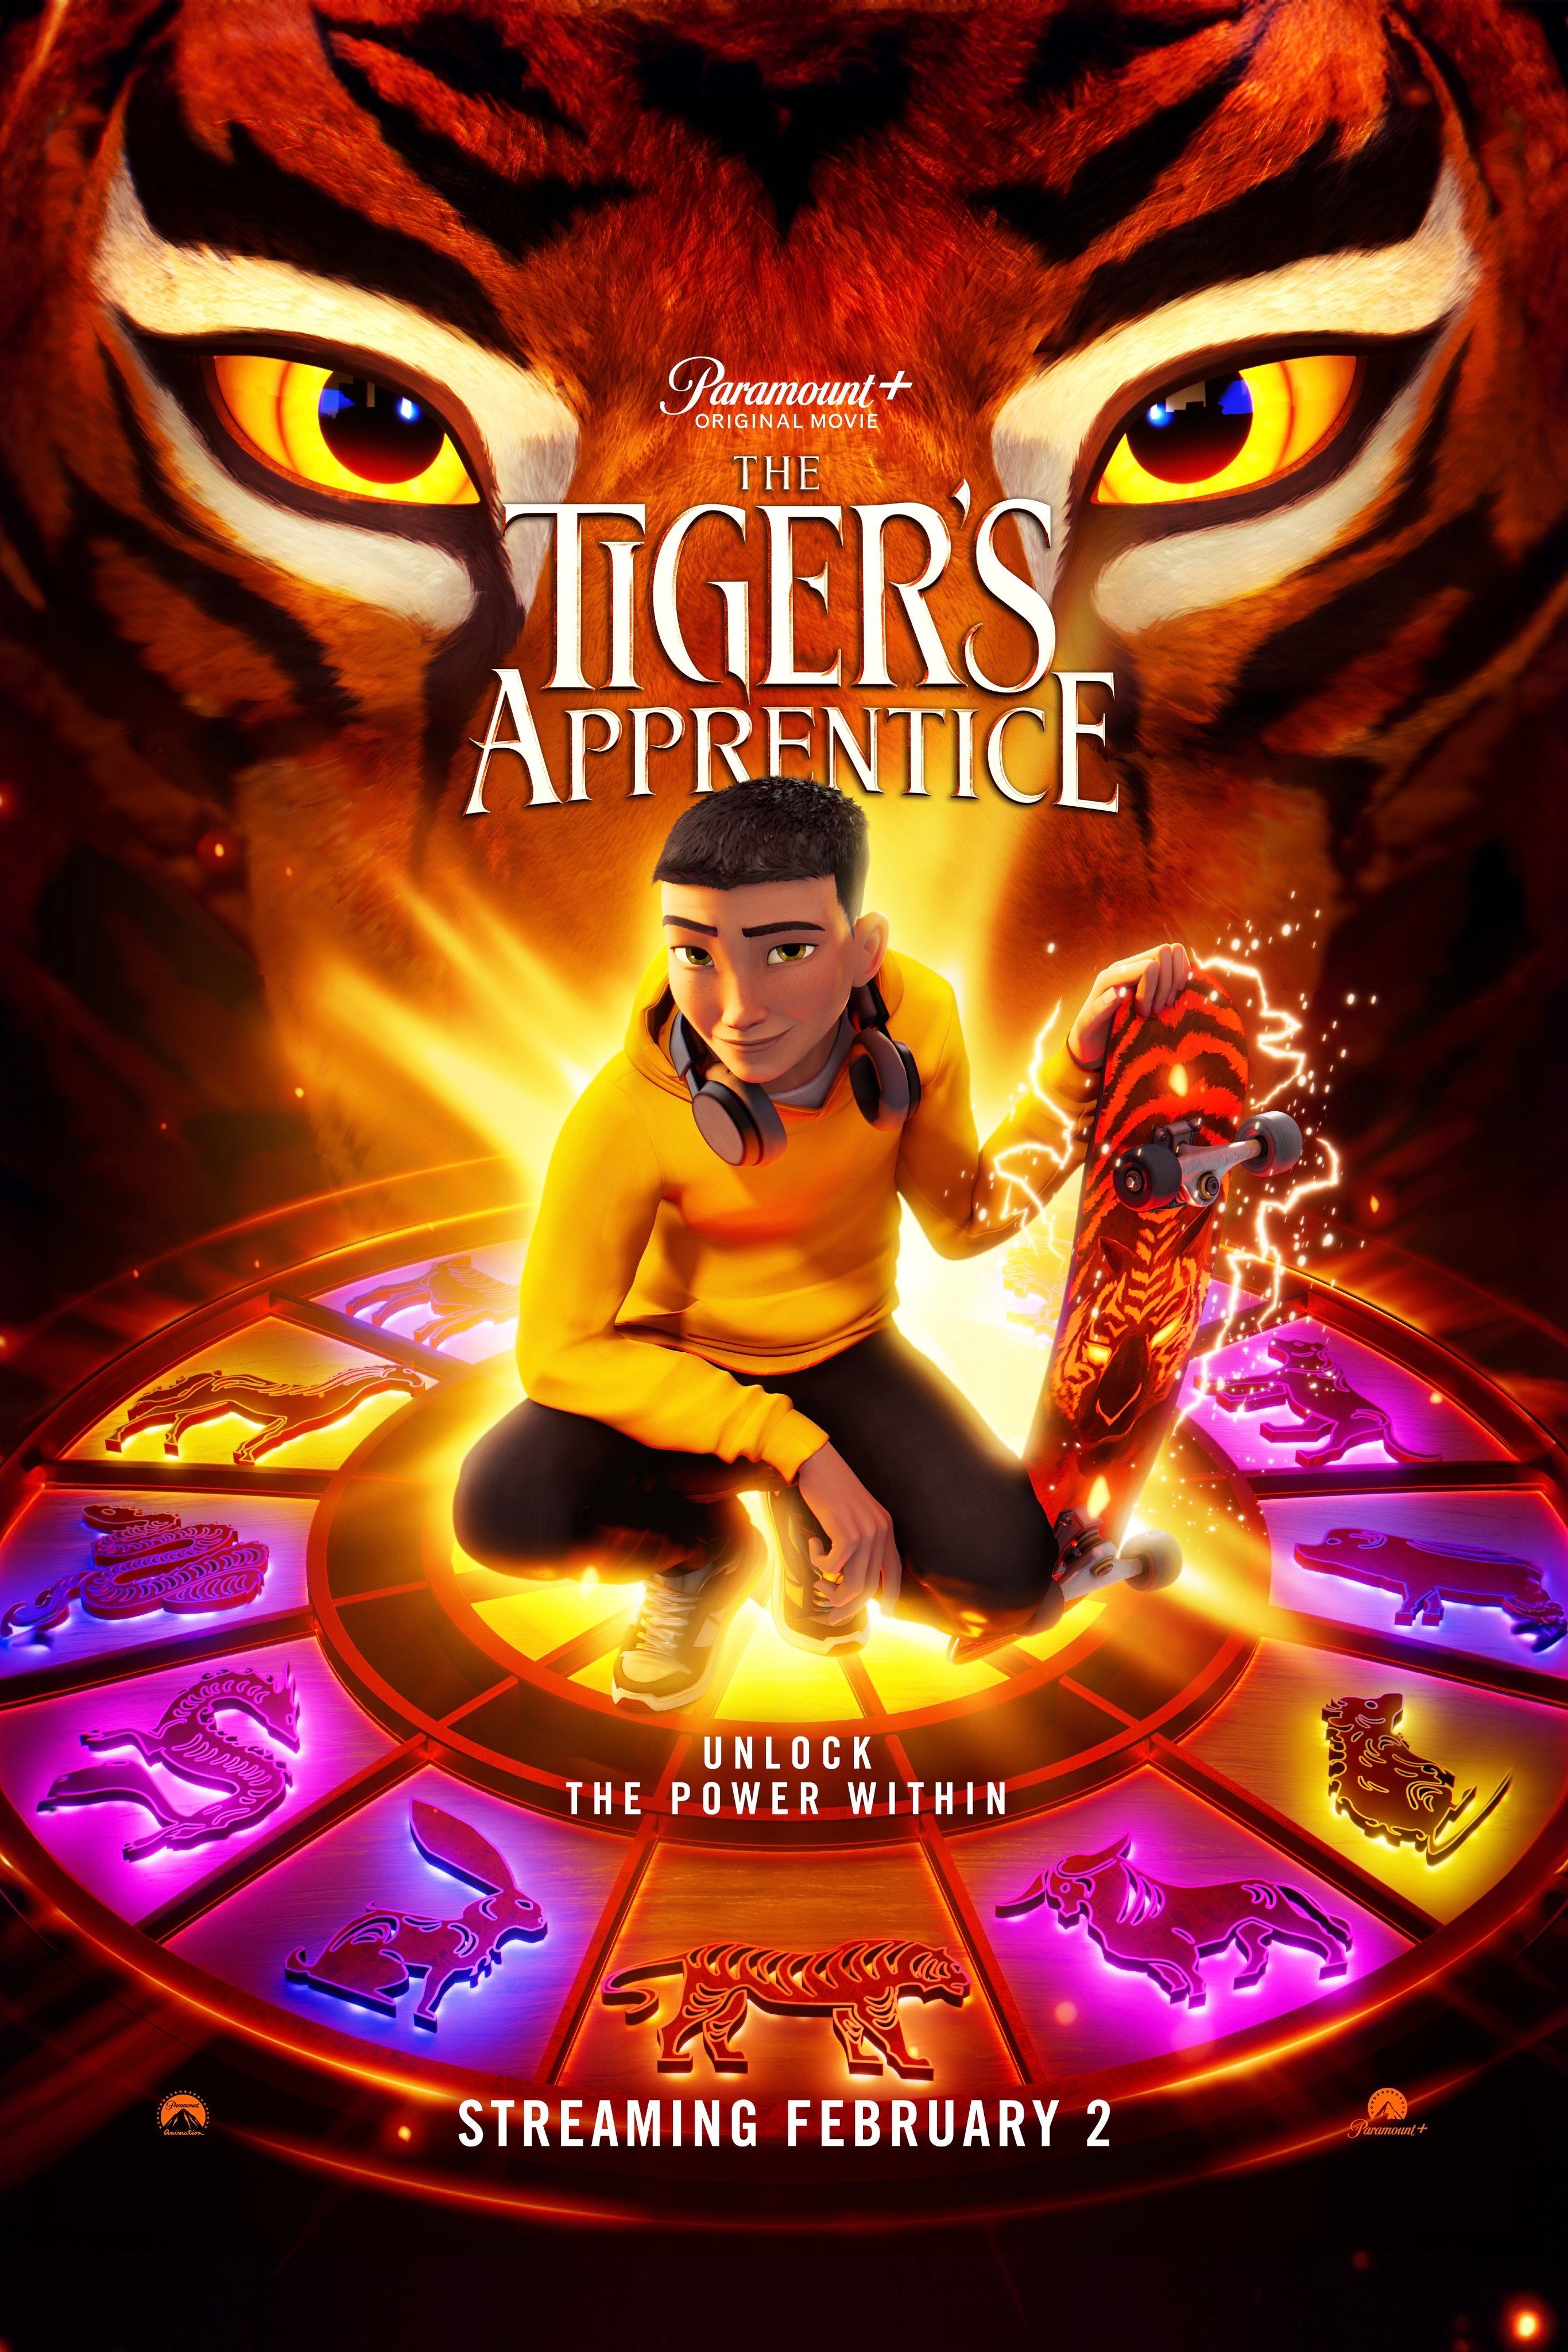 The Tiger’s Apprentice Review: A Hollow Animation That Doesn’t Properly Develop Its Characters